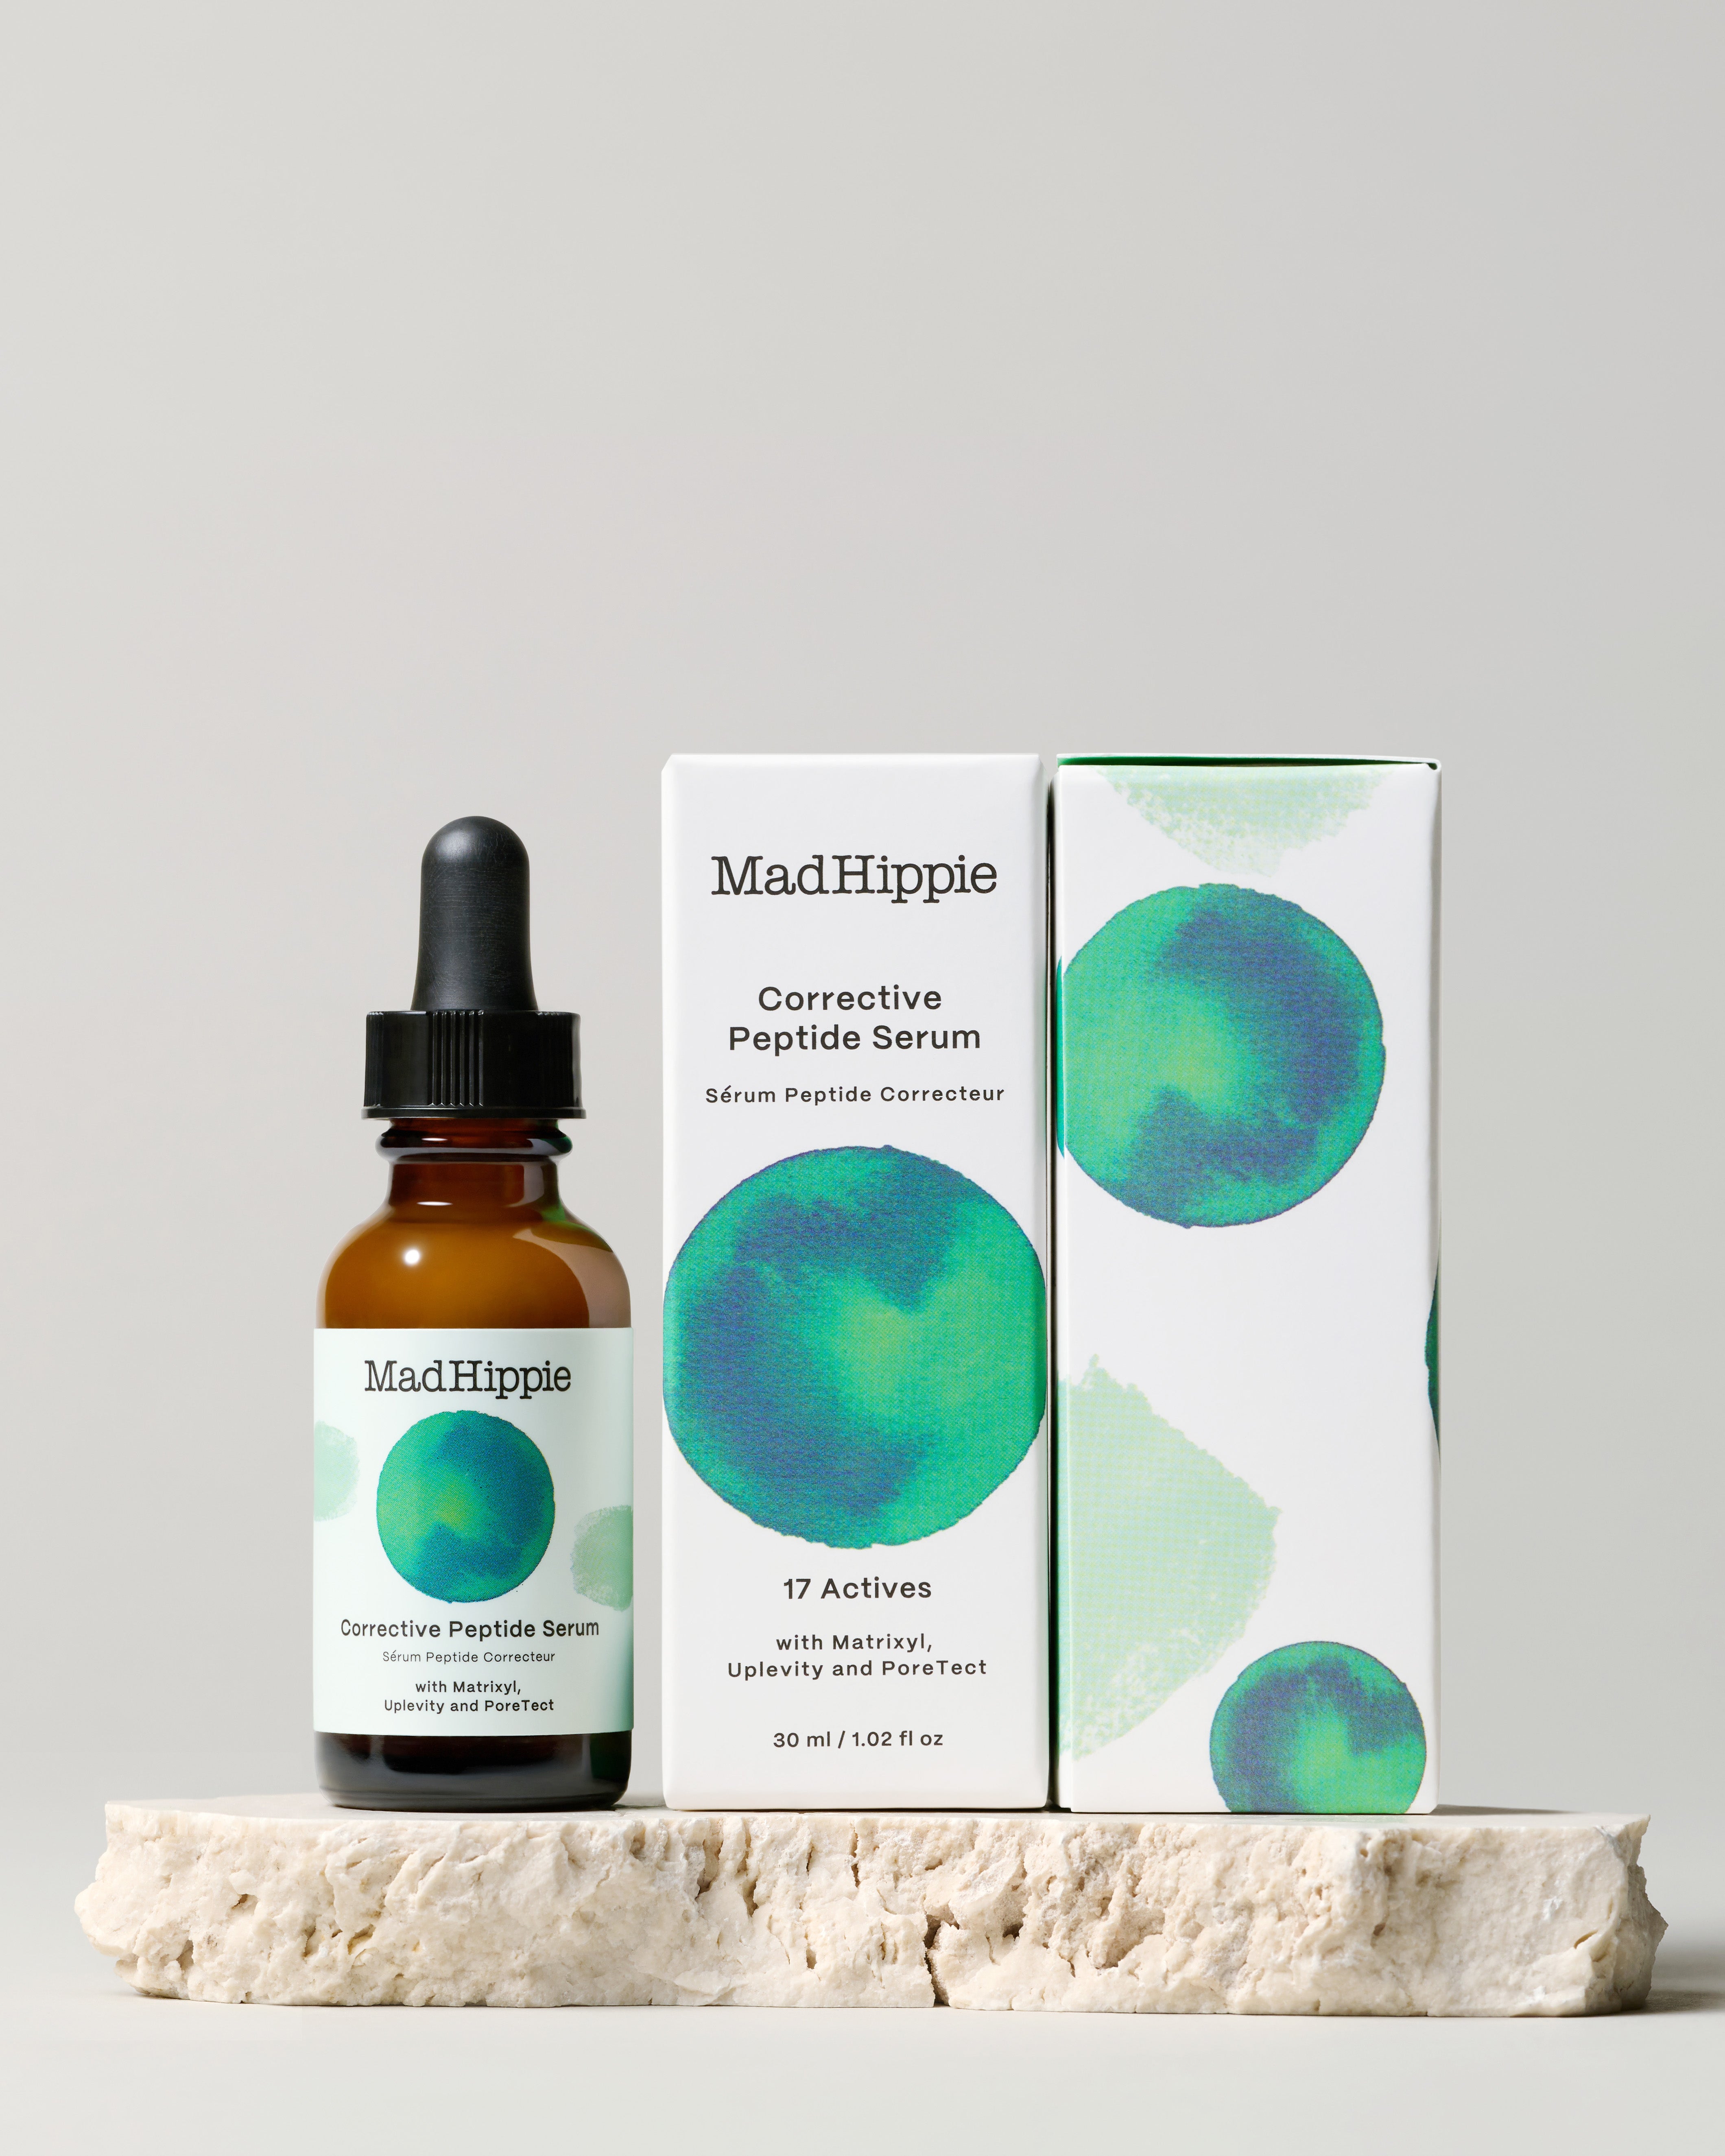 Corrective Peptide Serum + two boxes on stone slab, with gray background